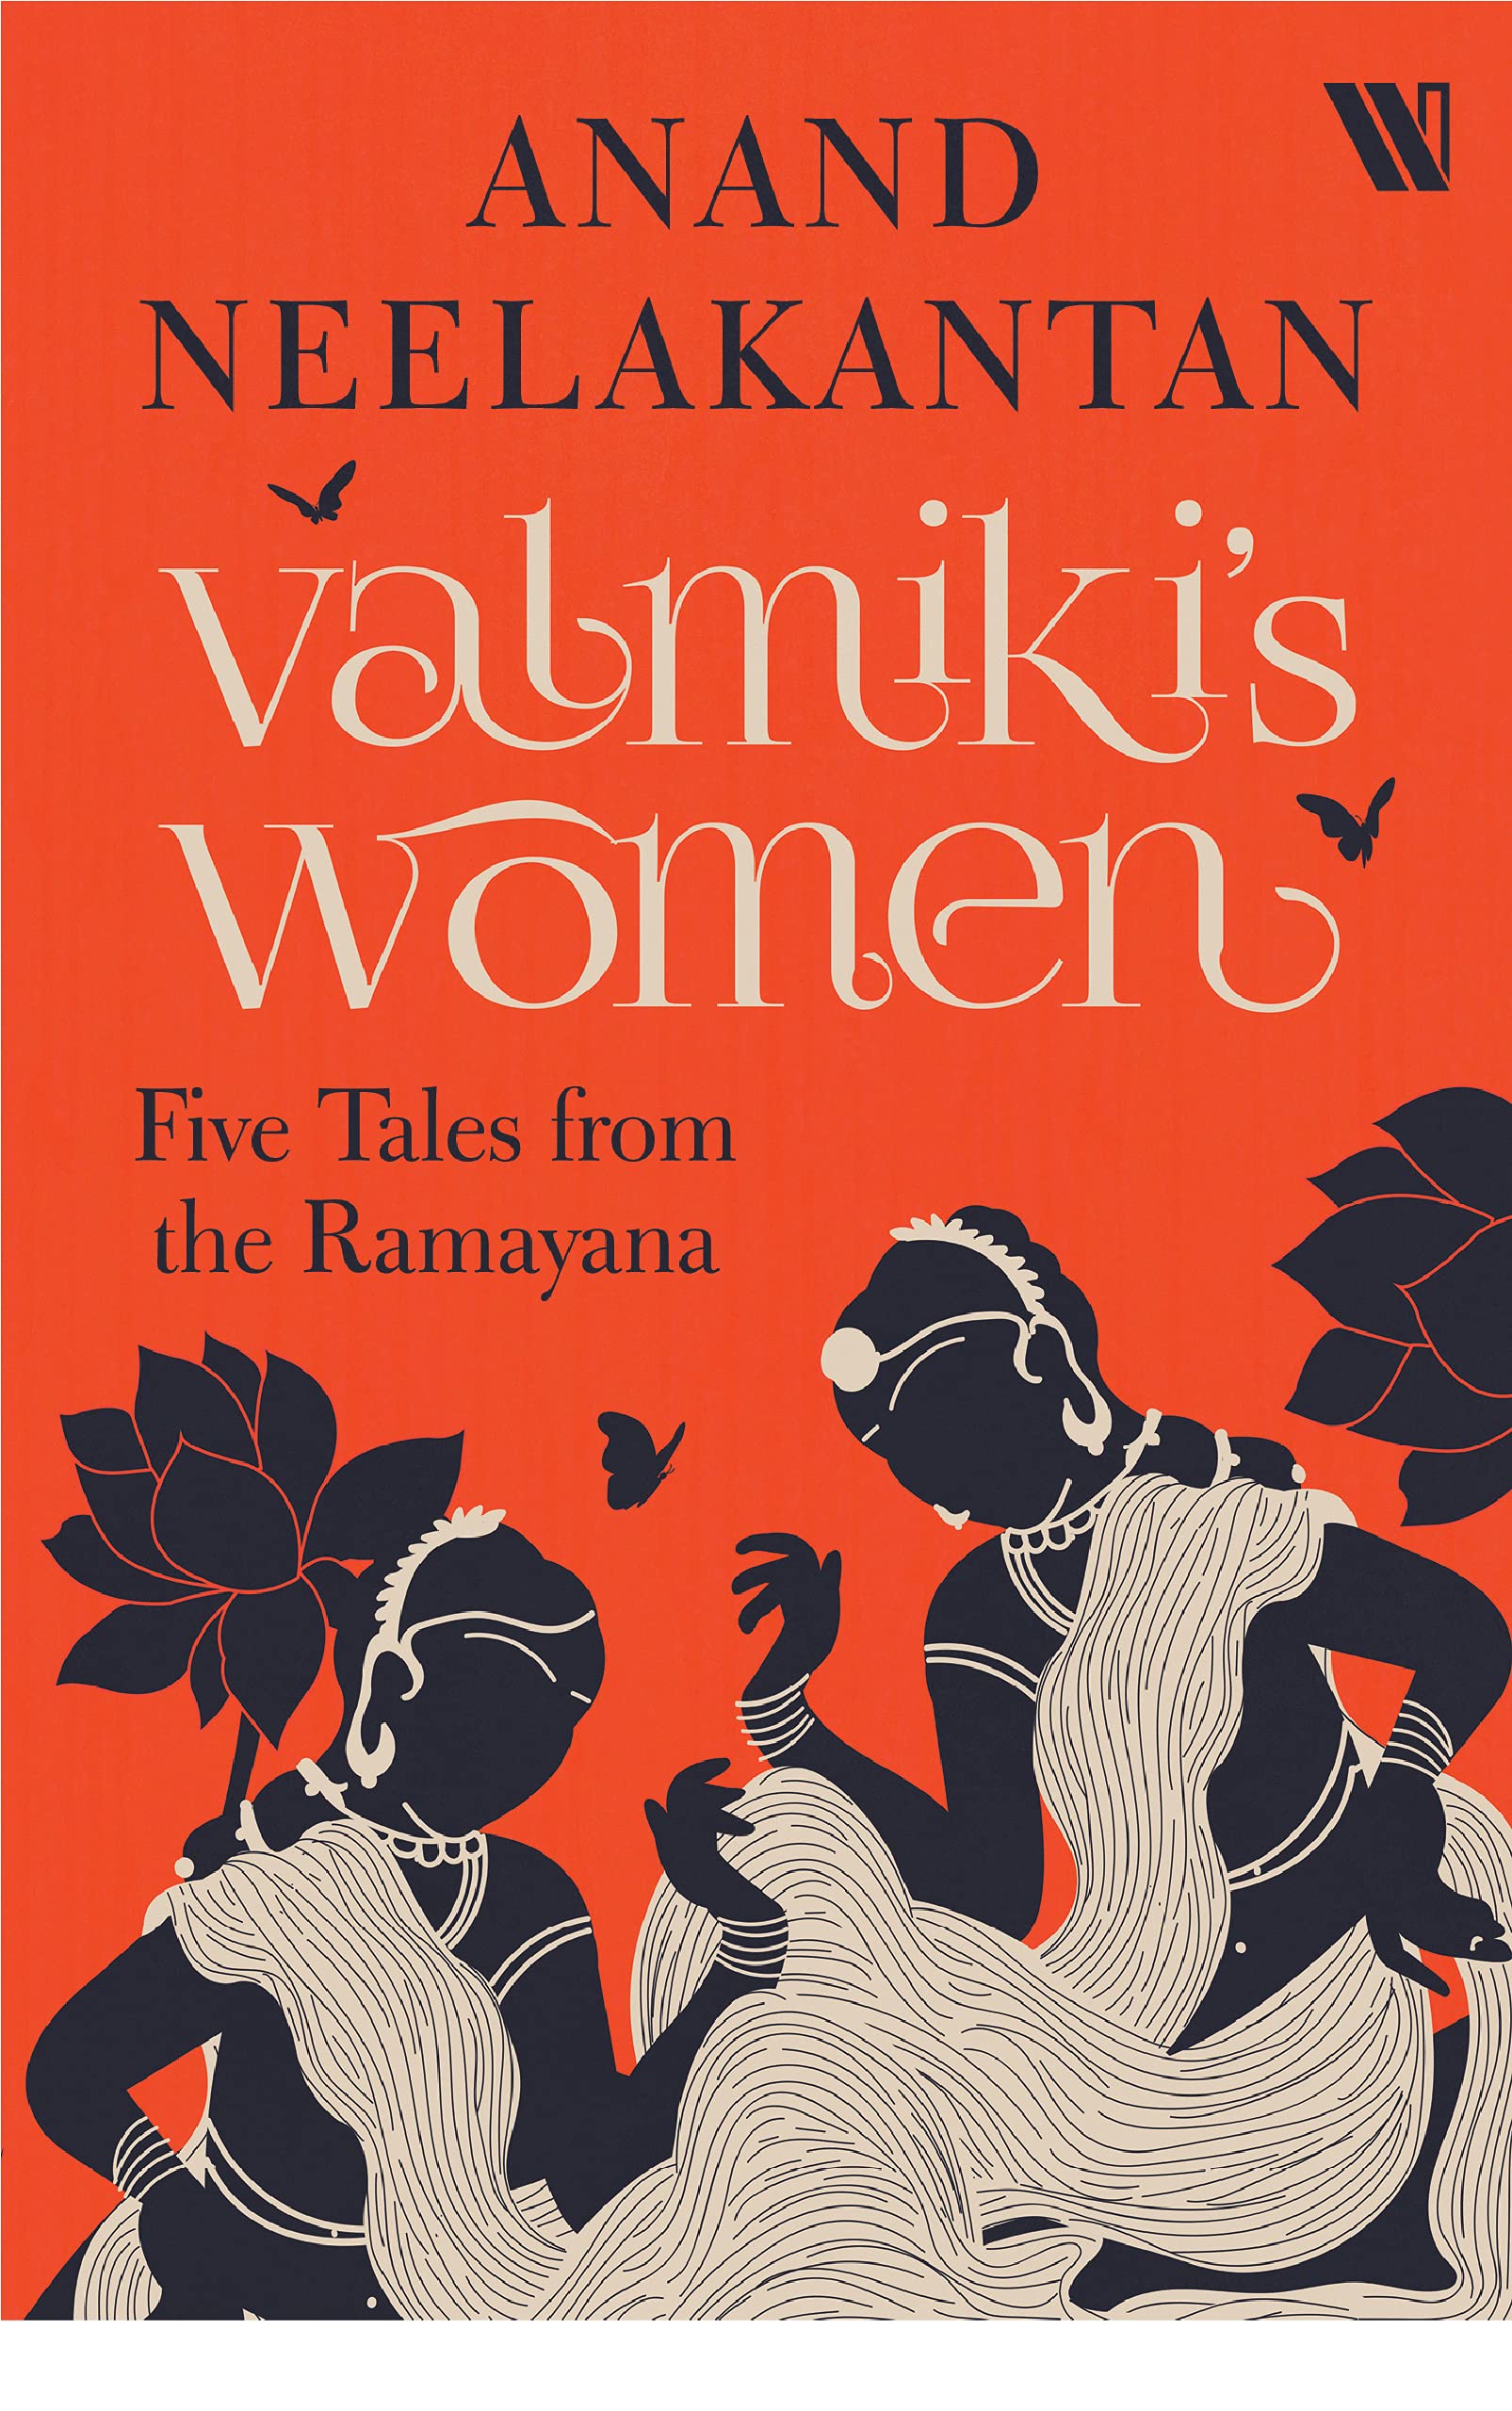 Valmikis Women: Five Tales from Ramayana by Anand Neelakantan